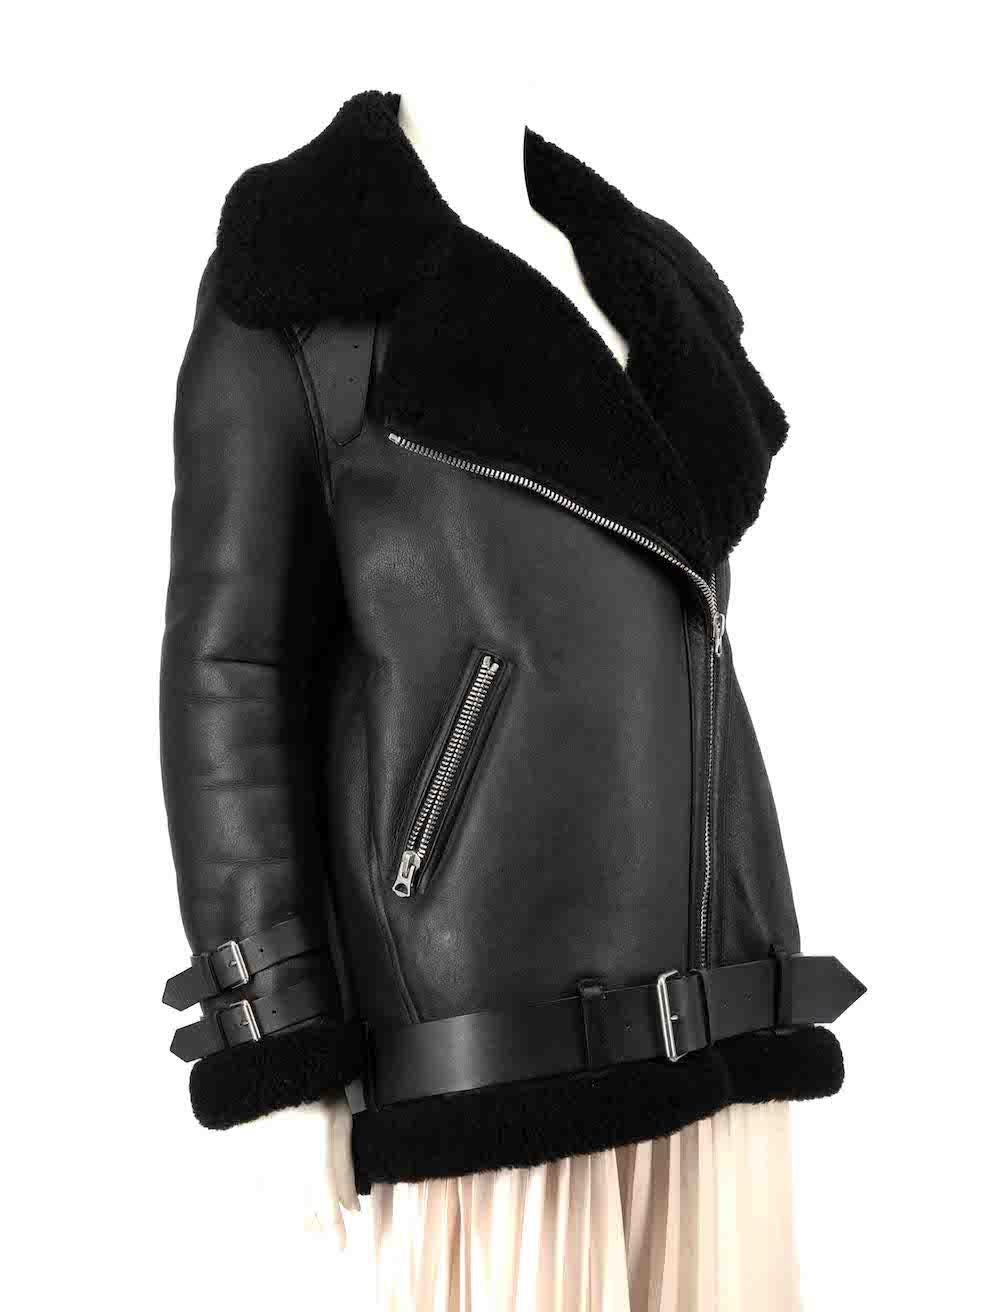 CONDITION is Very good. Minimal wear to coat is evident. Minimal wear to belt with minor scratches and wear to leather trim on the external underarms on this used Acne Studios designer resale item.
 
 
 
 Details
 
 
 Black
 
 Leather
 
 Biker